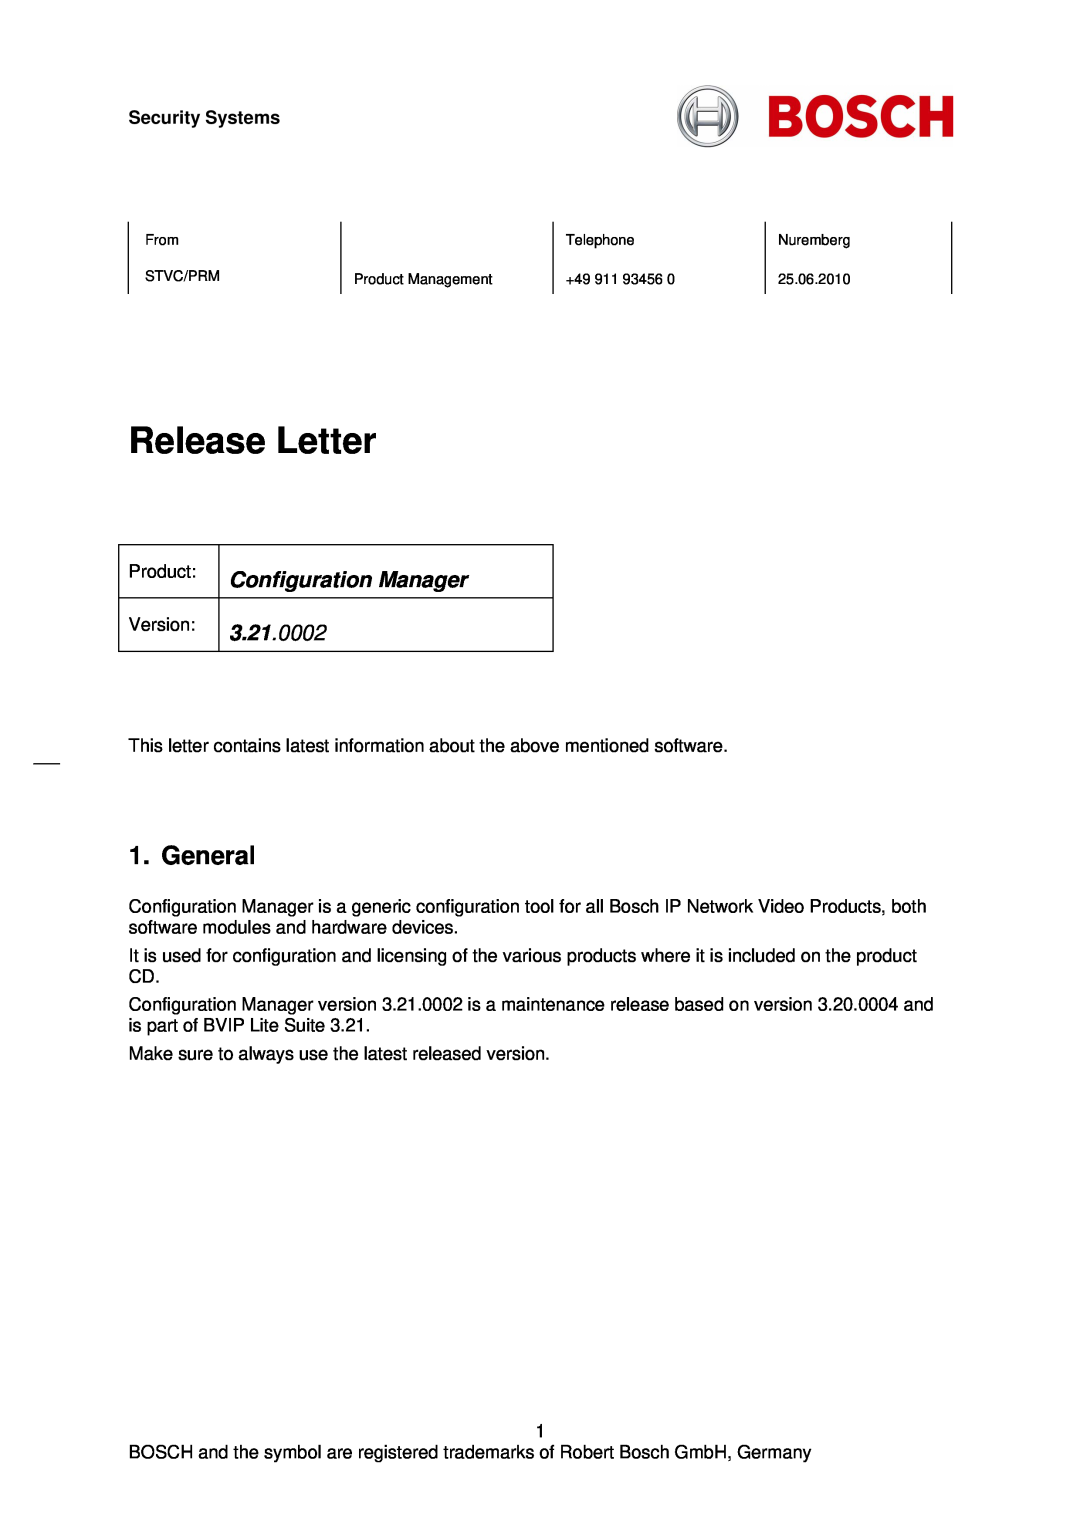 Bosch Appliances 3.21.0002 manual General, Security Systems, Release Letter, Configuration Manager 